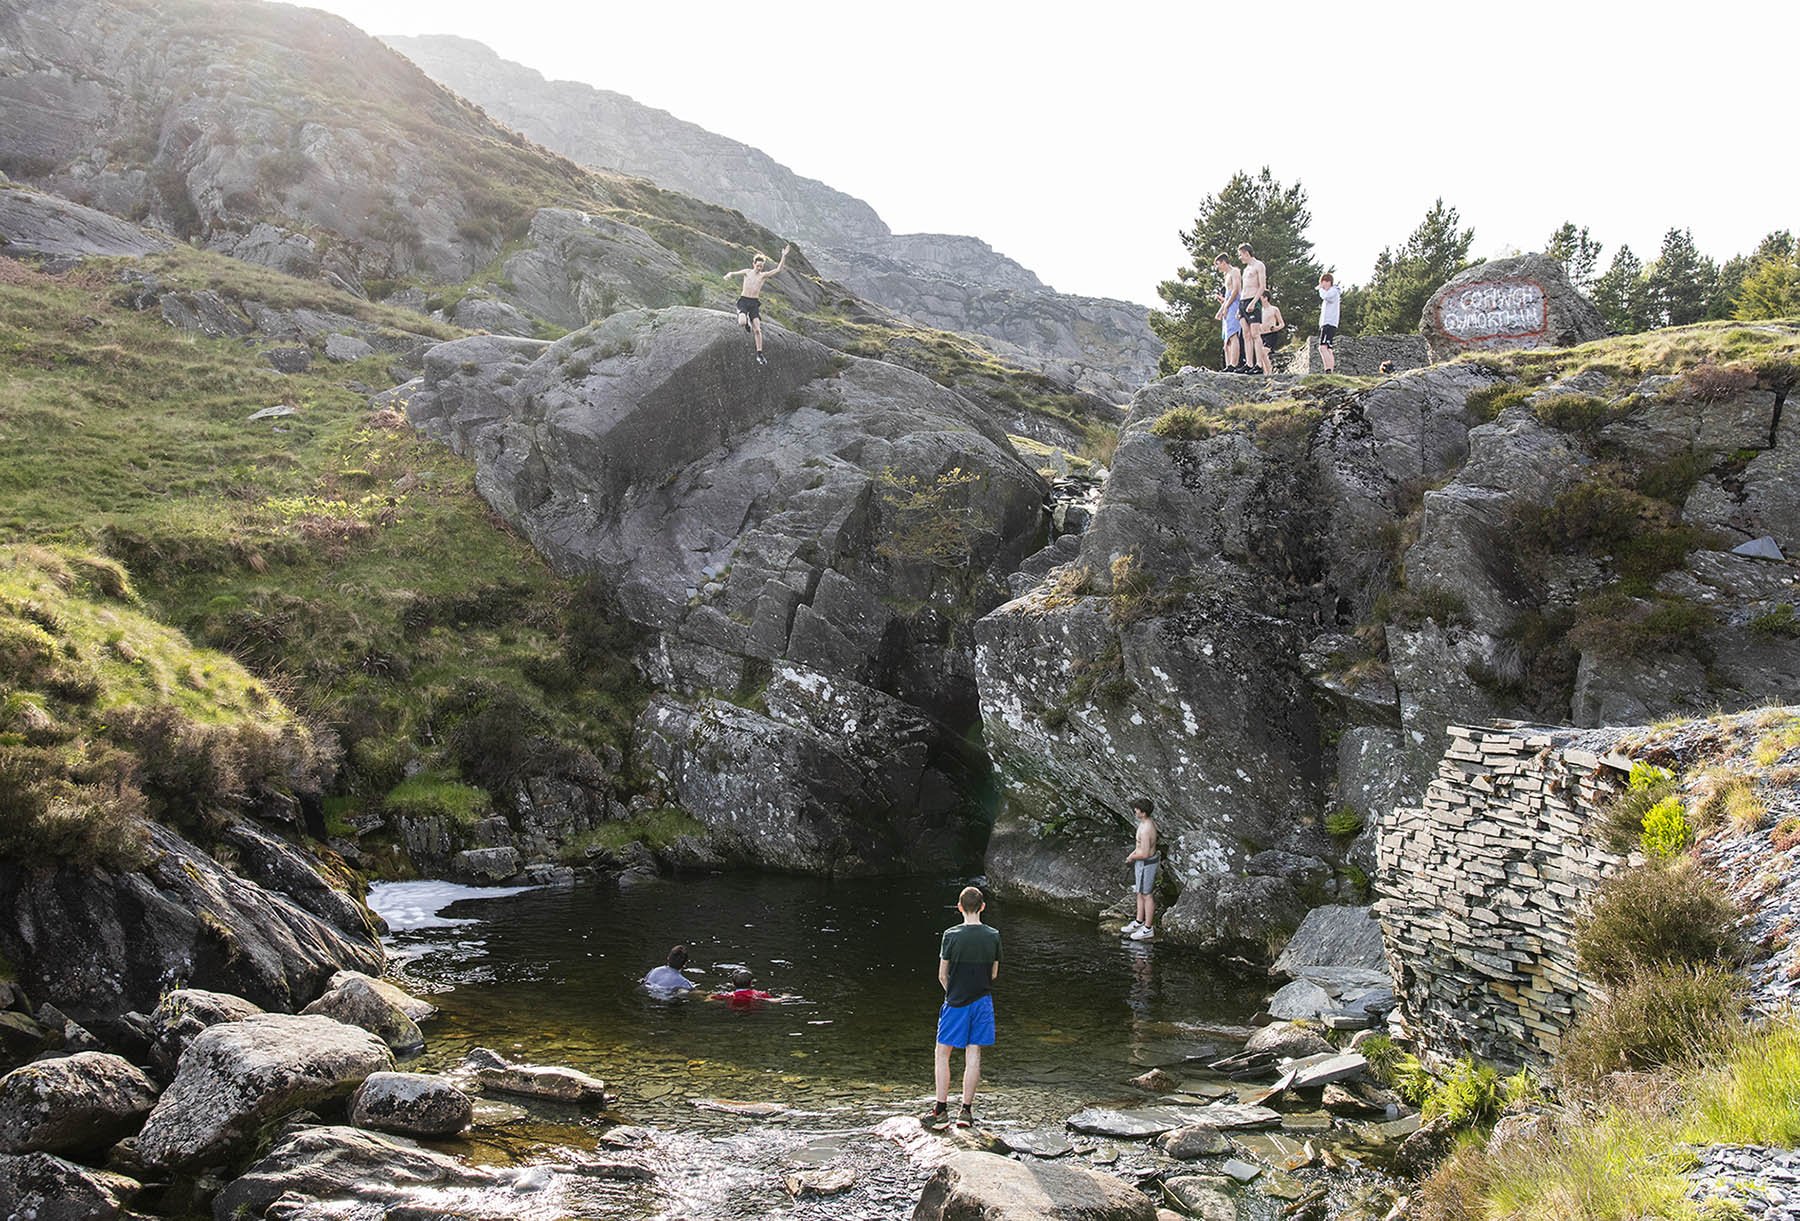  Boys jumping in to a pool in the slate landscape in Snowdonia above Blaenau Ffestiniog.  